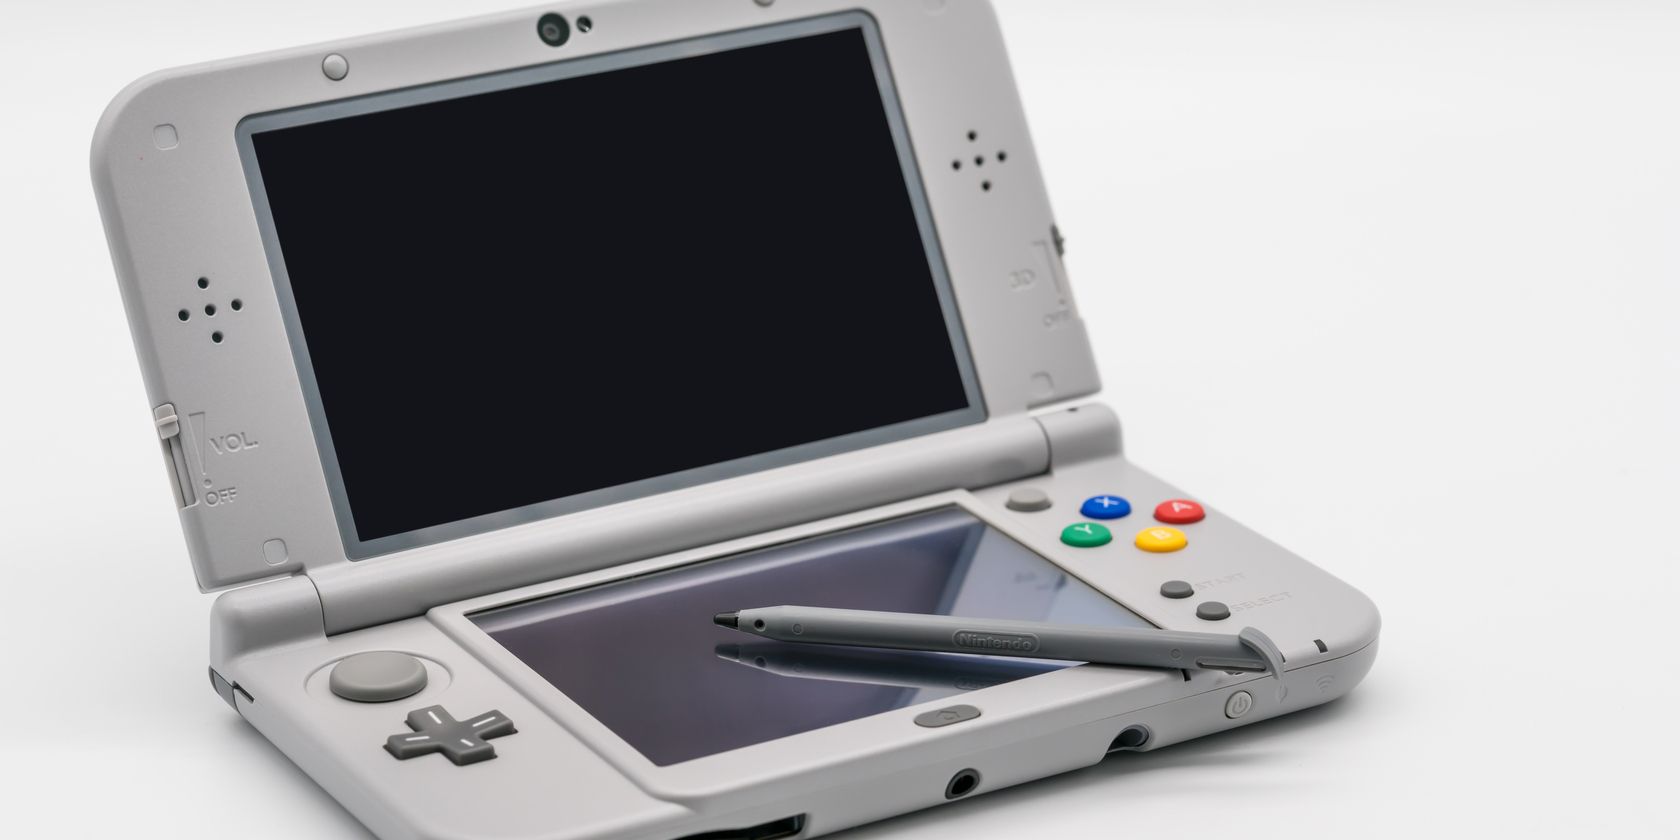 Soldat Fascinate Tale 8 Annoying Nintendo 3DS Problems and How to Fix Them